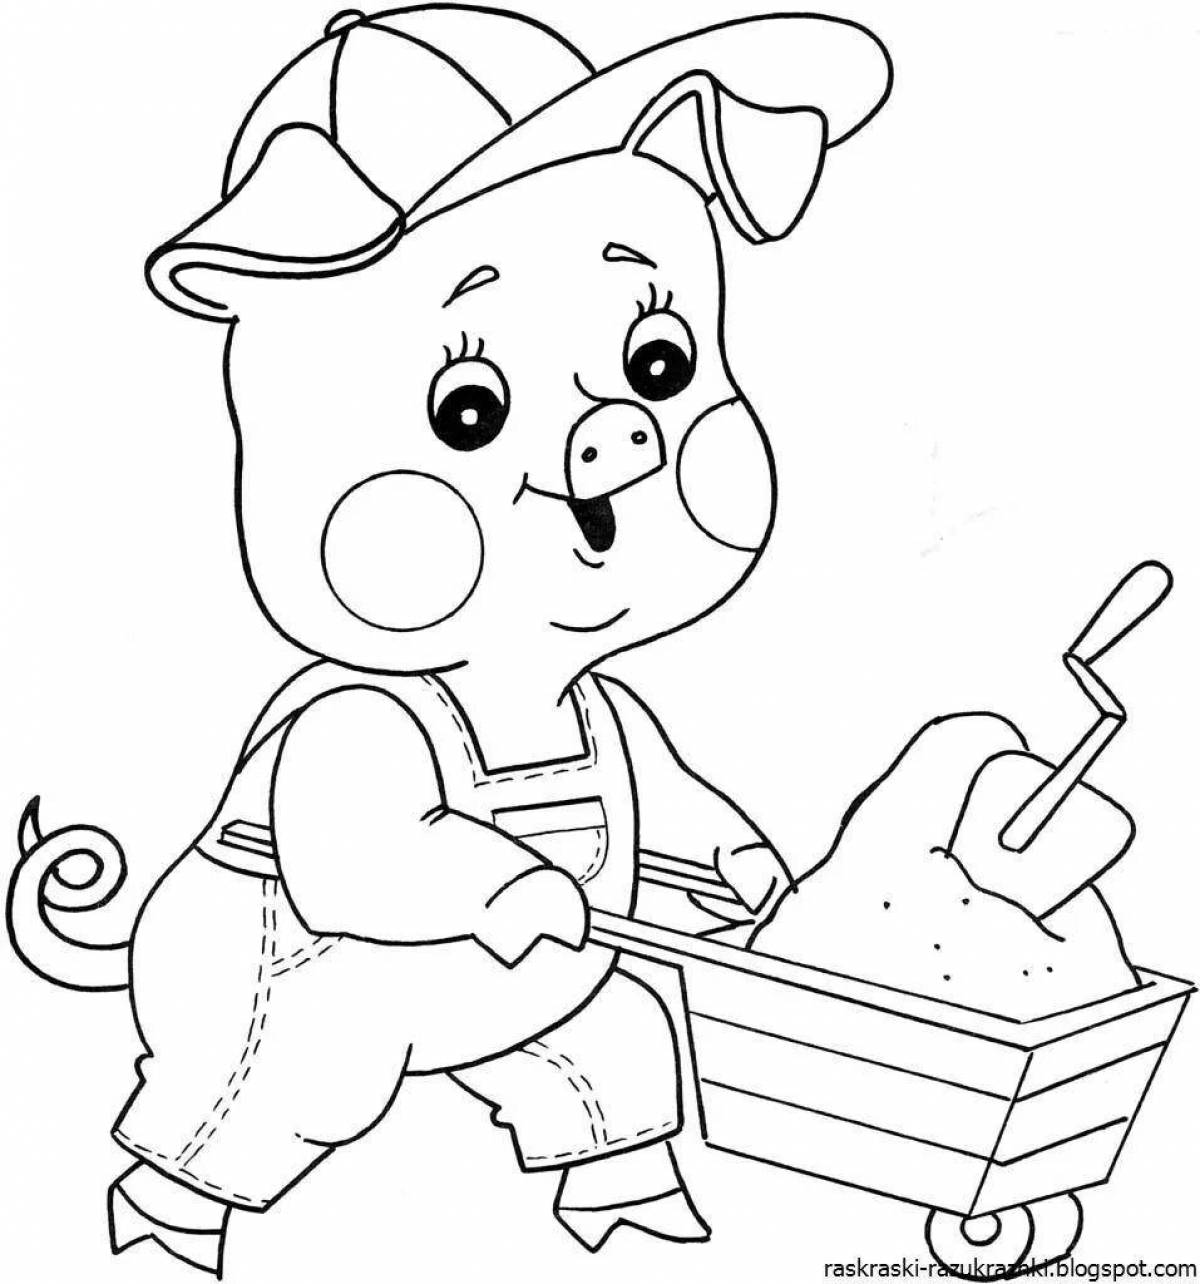 Funny fairy tale coloring pages for kids